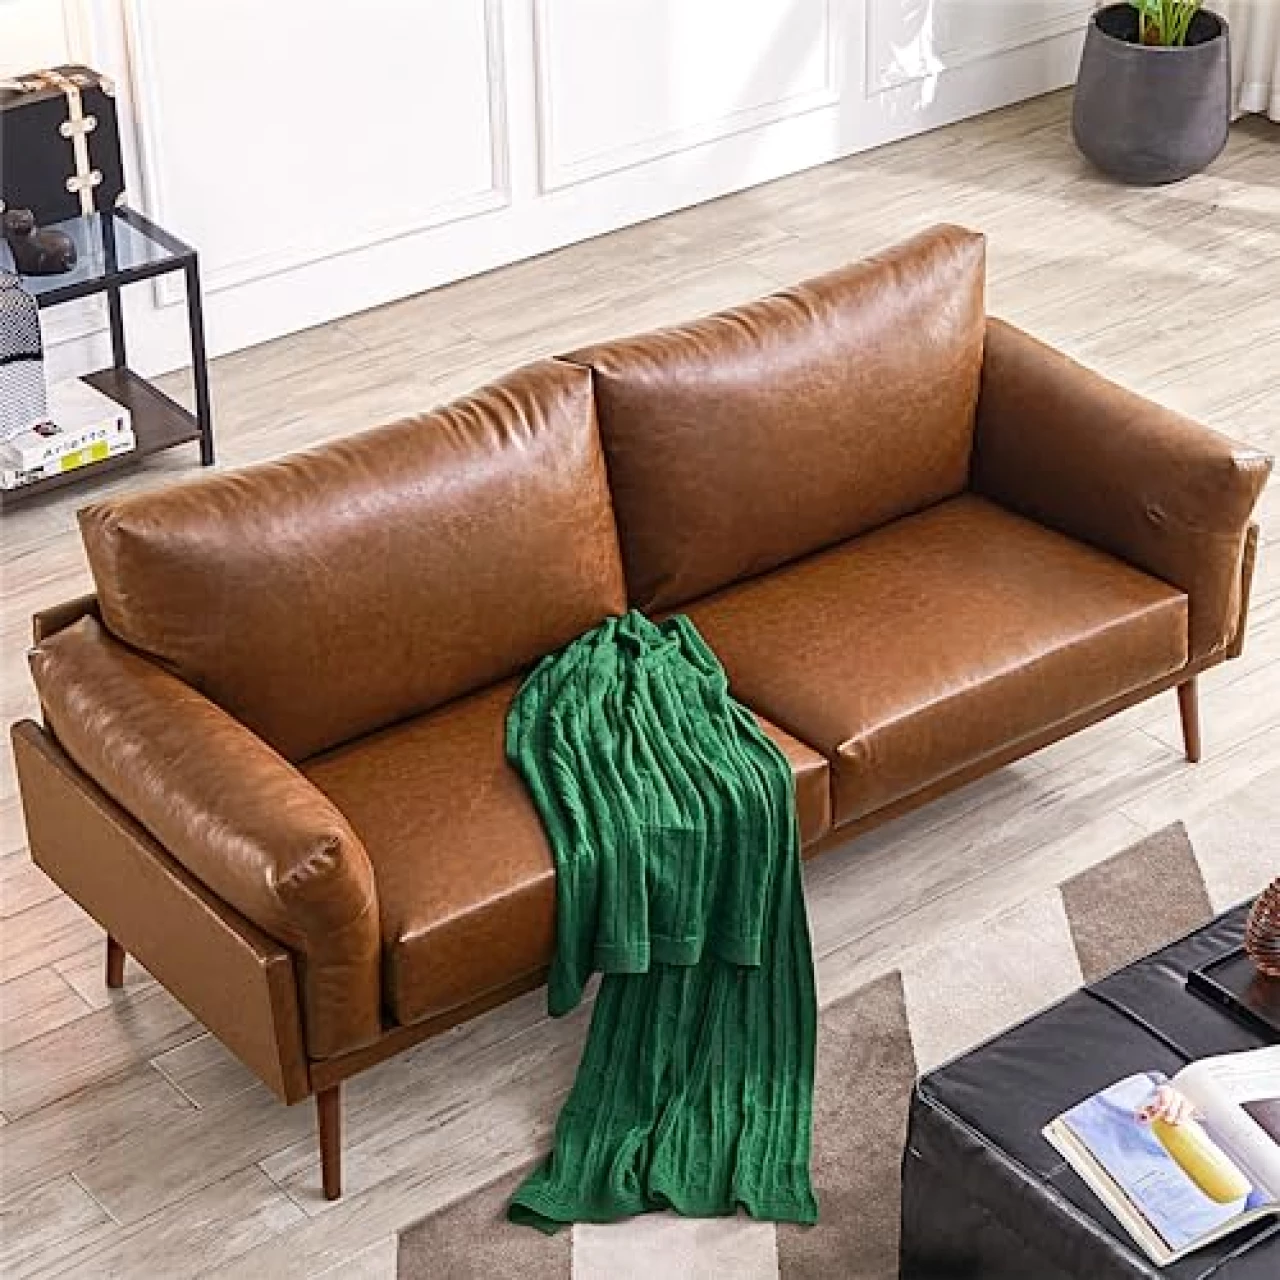 Vonanda Flora Couch, Faux Leather Sofa Caramel, 3 Seater Couch with Soft Cloud Cushions, 72 Inch Couch for Durable Small Spaces, Compact Apartment, House, Living Room,Condo, Loft, Bungalow, Caramel